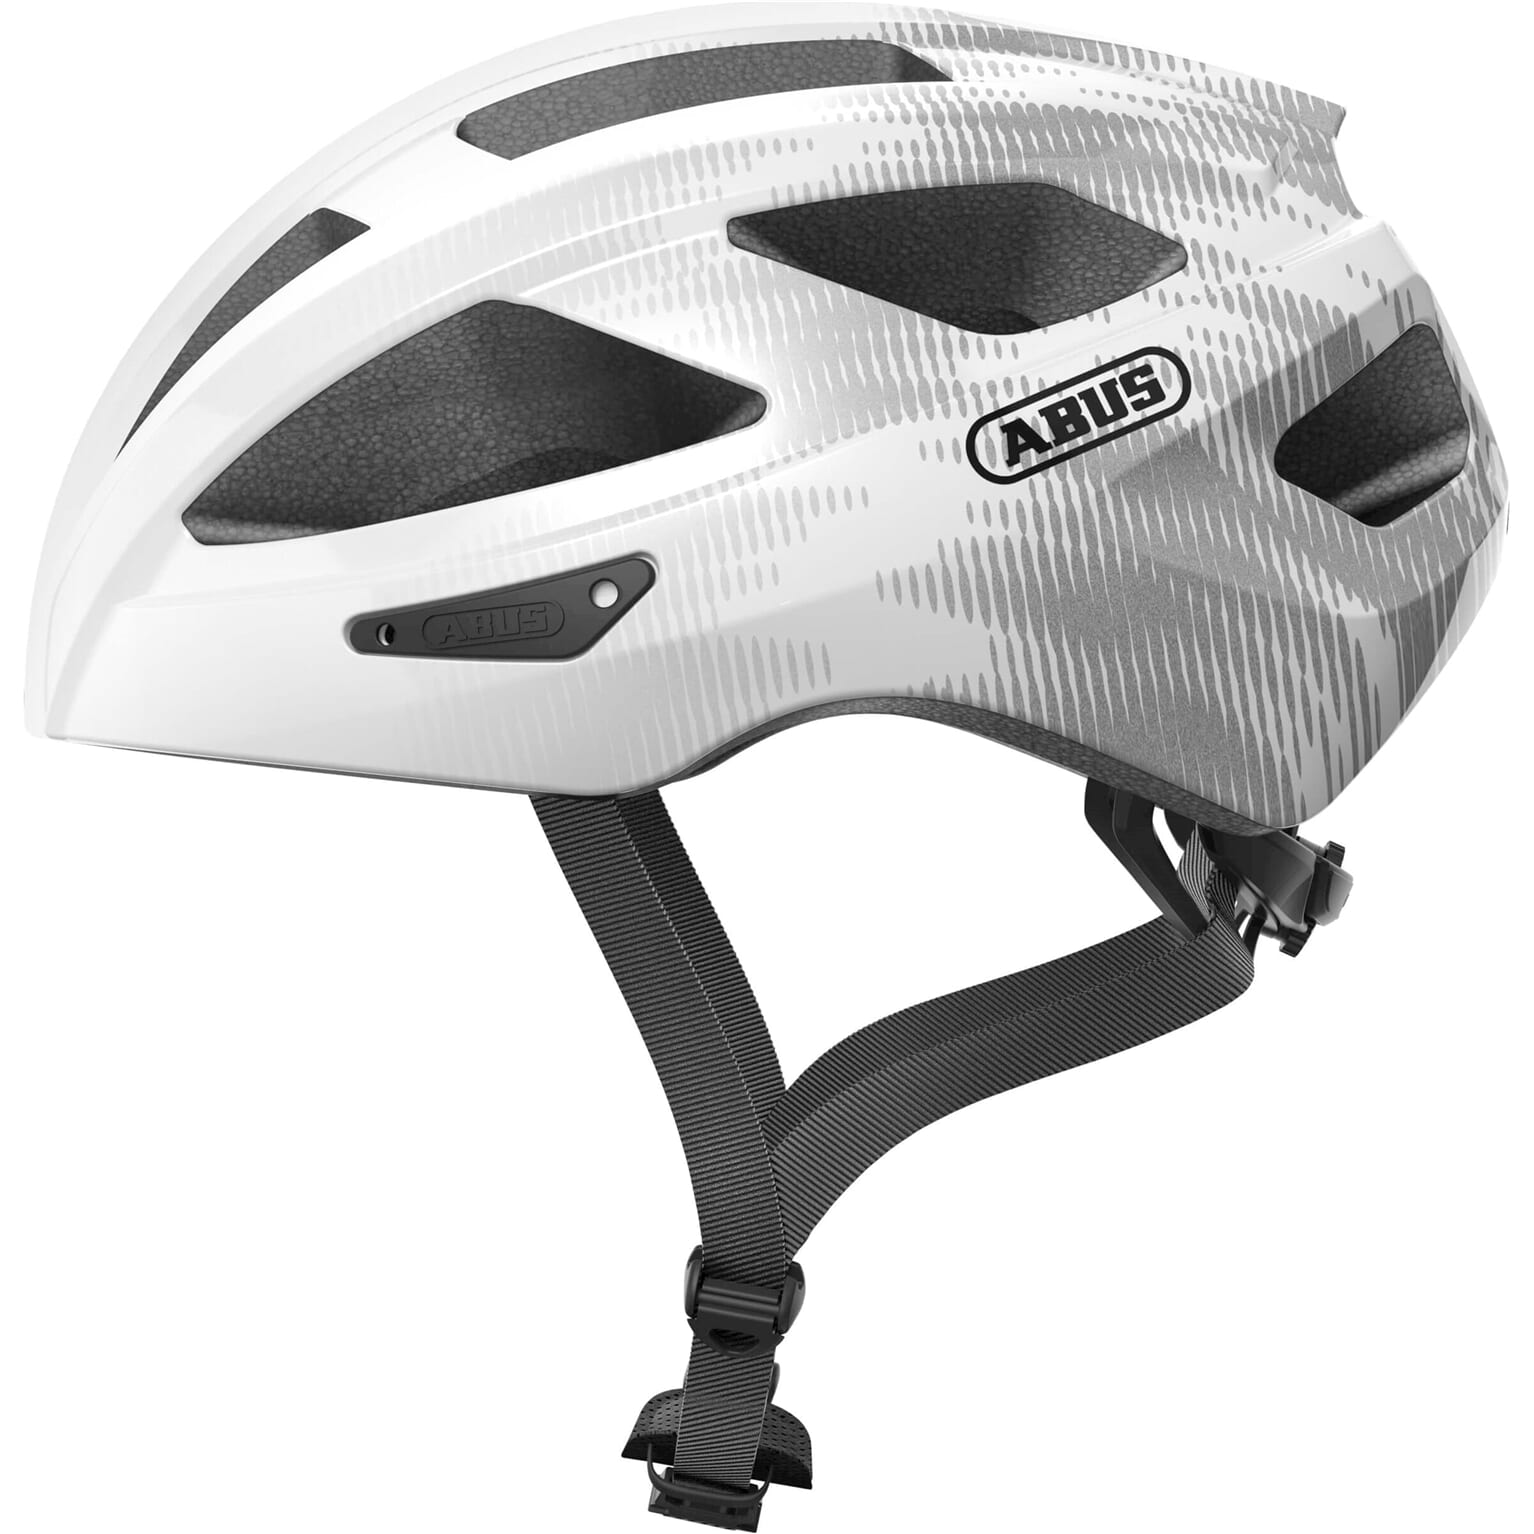 Abus helm Macator white silver S 51-55cm